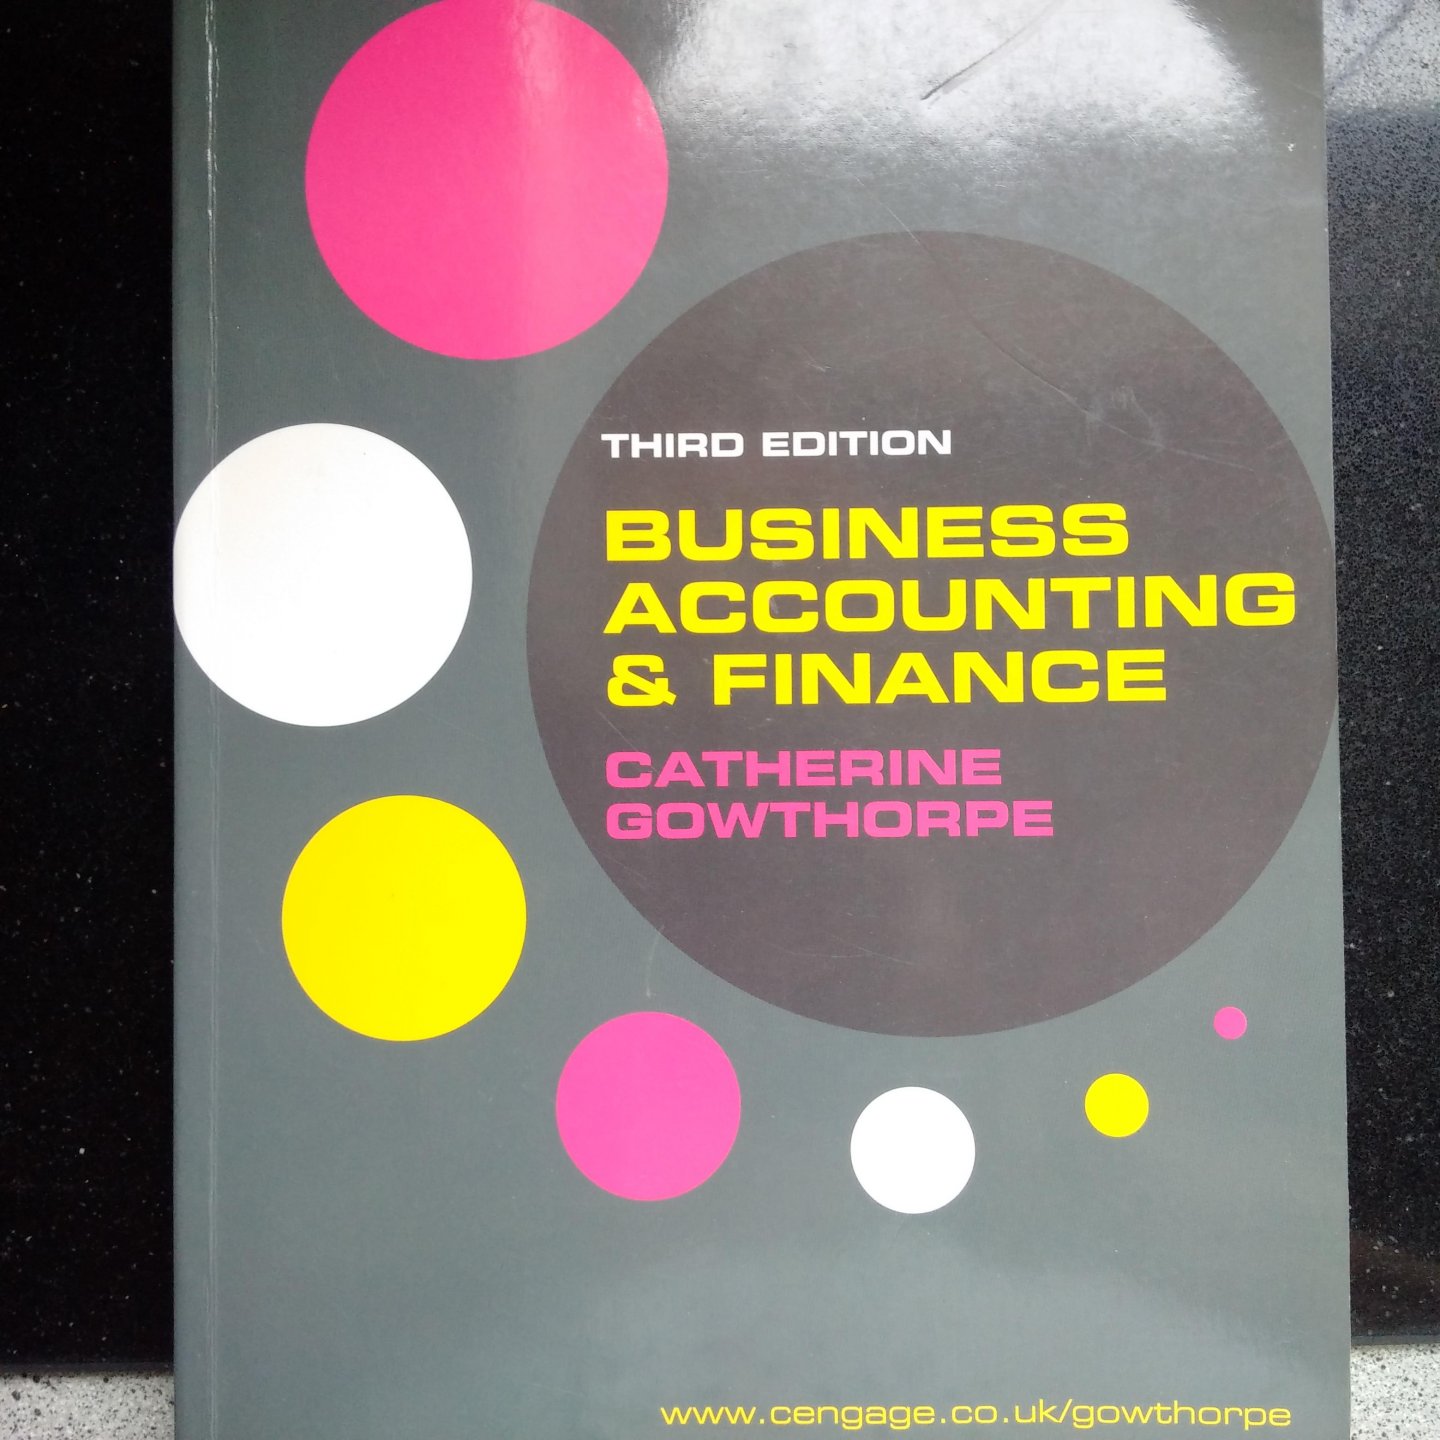 Gowthorpe, Catherine - Business Accounting & Finance